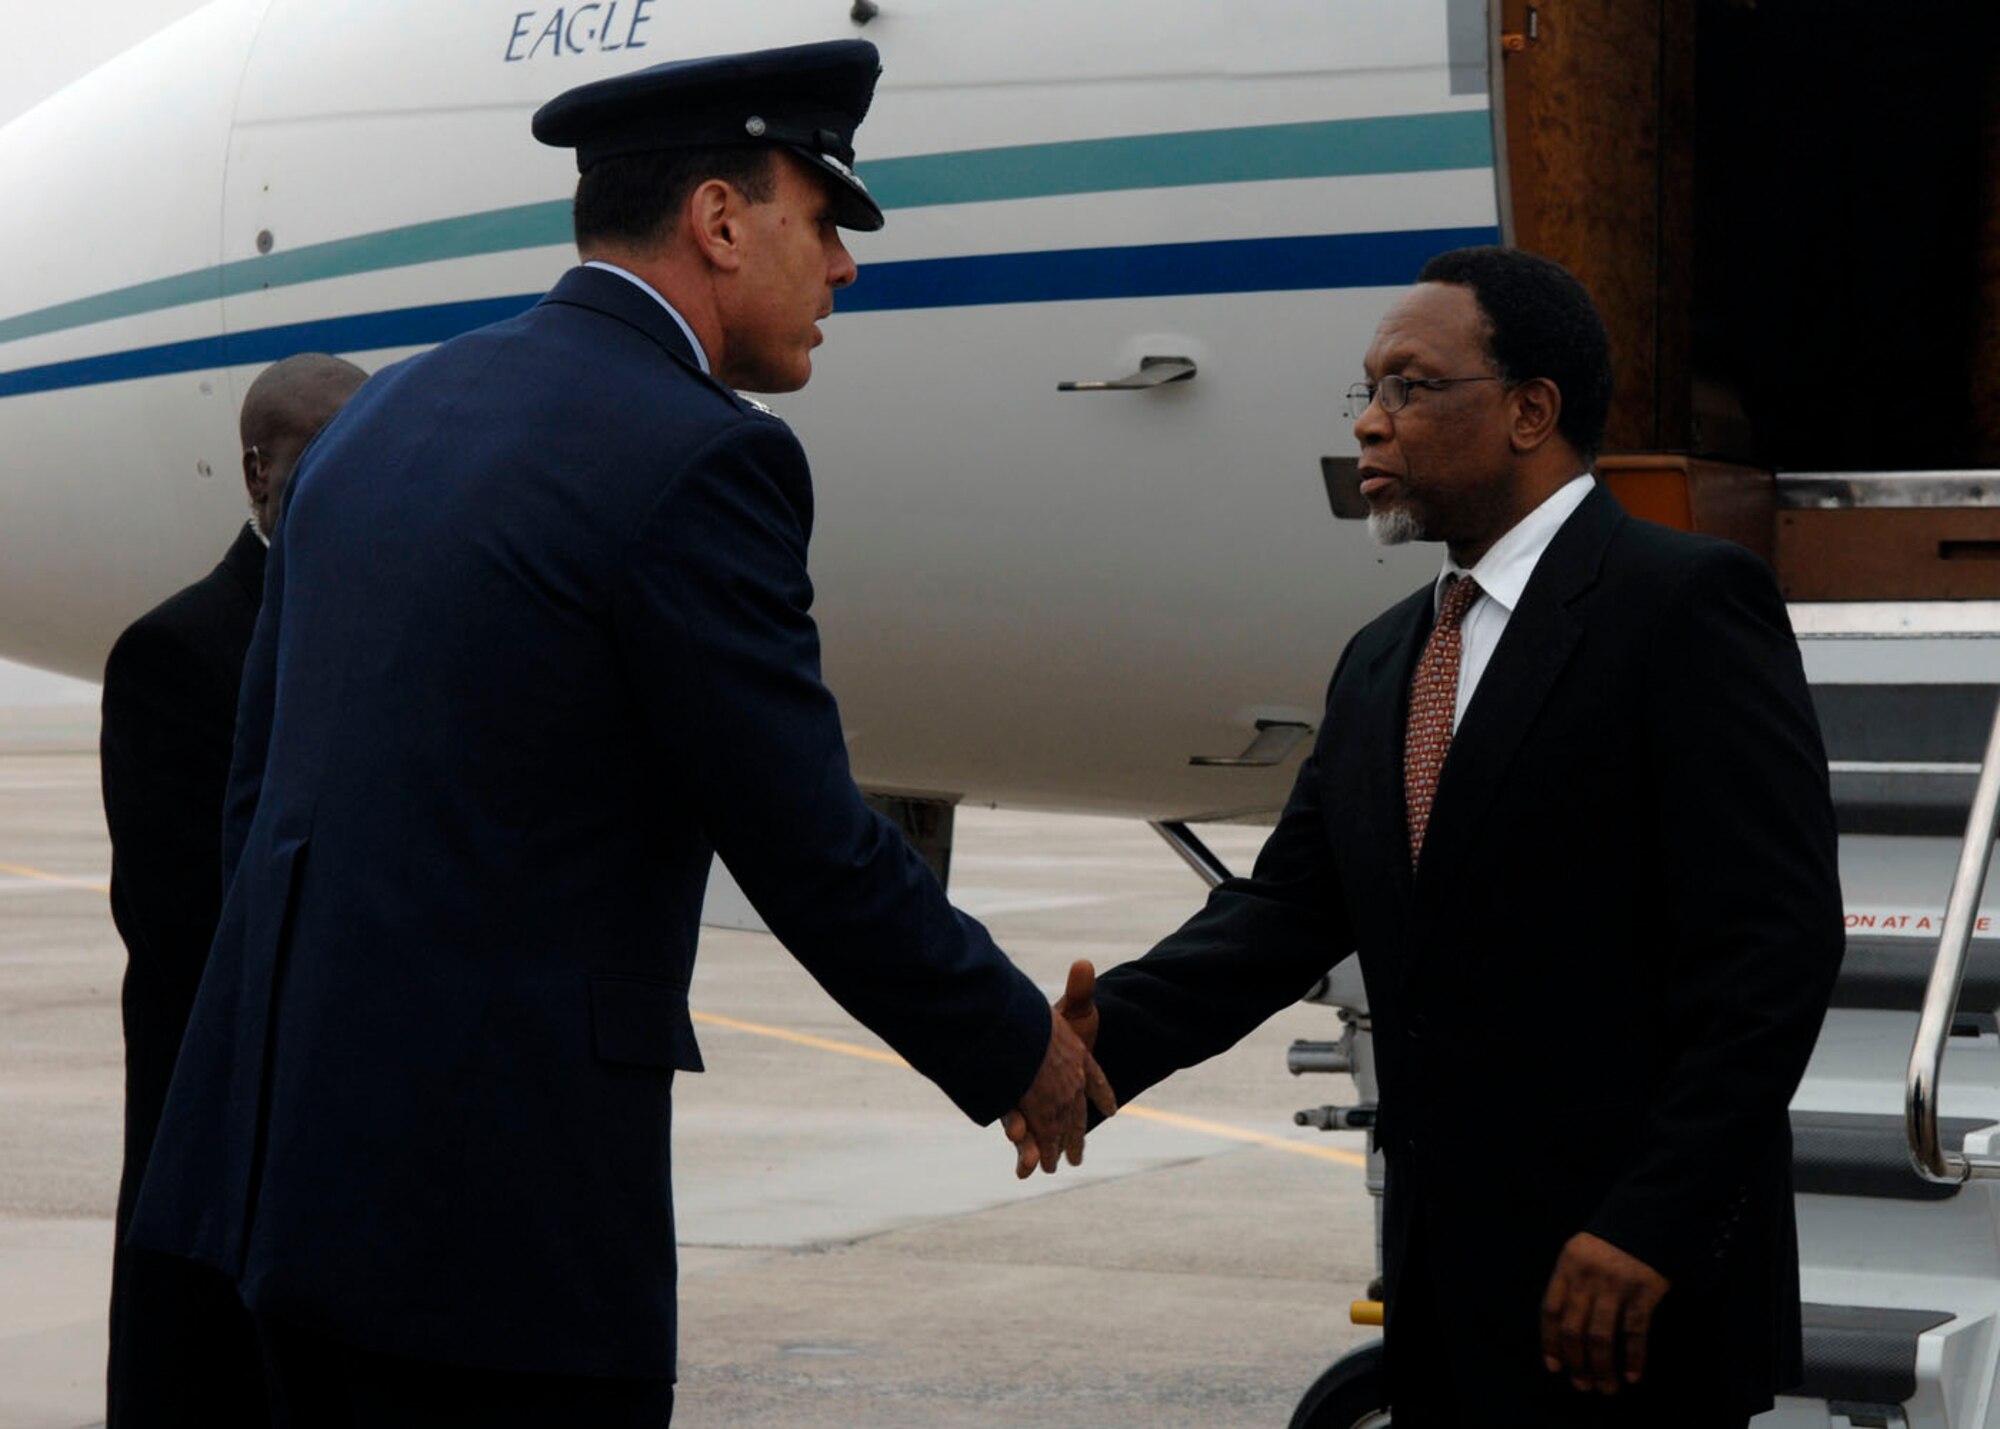 Colonel Steven M. Shepro, 316th Wing commander, greets South African President Kgalema Motlanthe at Andrews Air Force Base, Md., Nov. 14, 2008, for the two-day G20 Summit at the White House in Washington. The summit, hosted by U.S. President George W. Bush, will bring together world leaders to discuss the increasing global financial crisis, its causes and efforts to resolve it. (U.S. Air Force photo by Senior Airman Melissa Stonecipher)